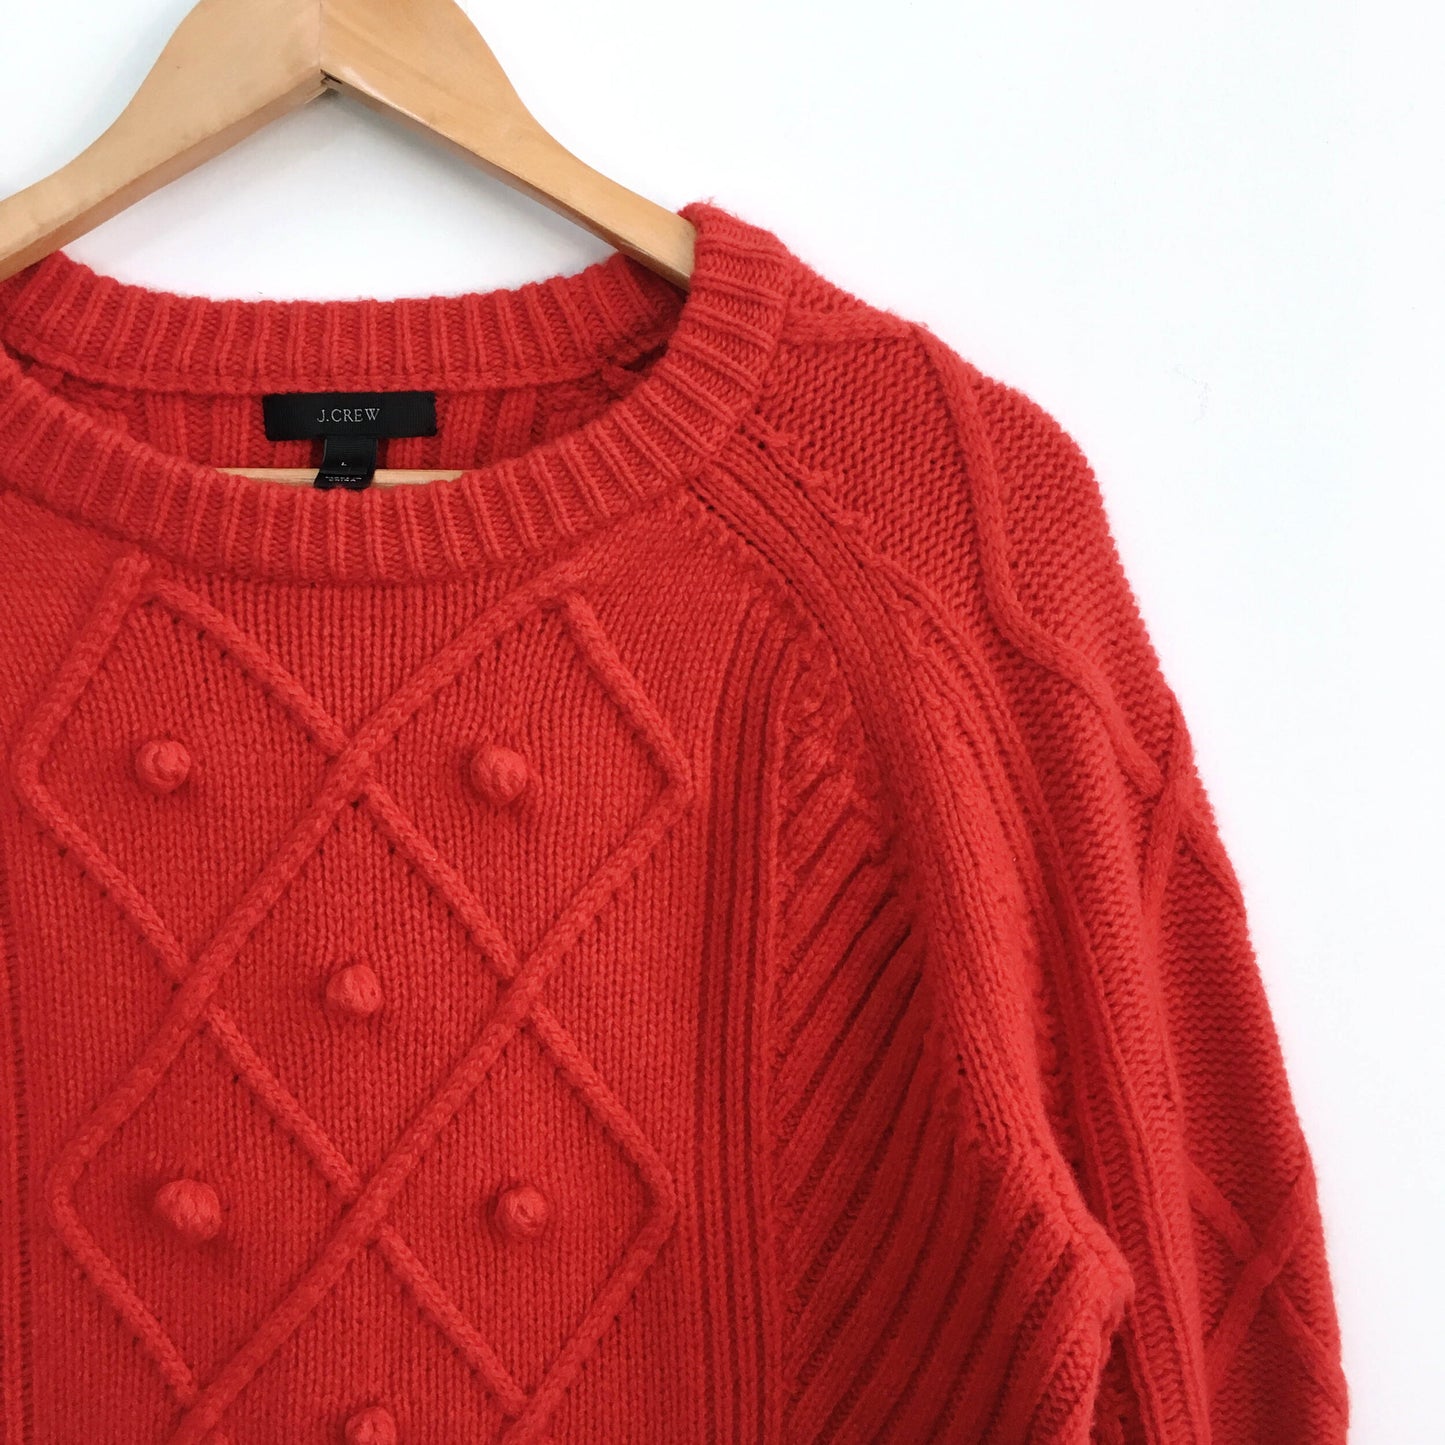 J Crew Cable Pom Pom Sweater - size Large